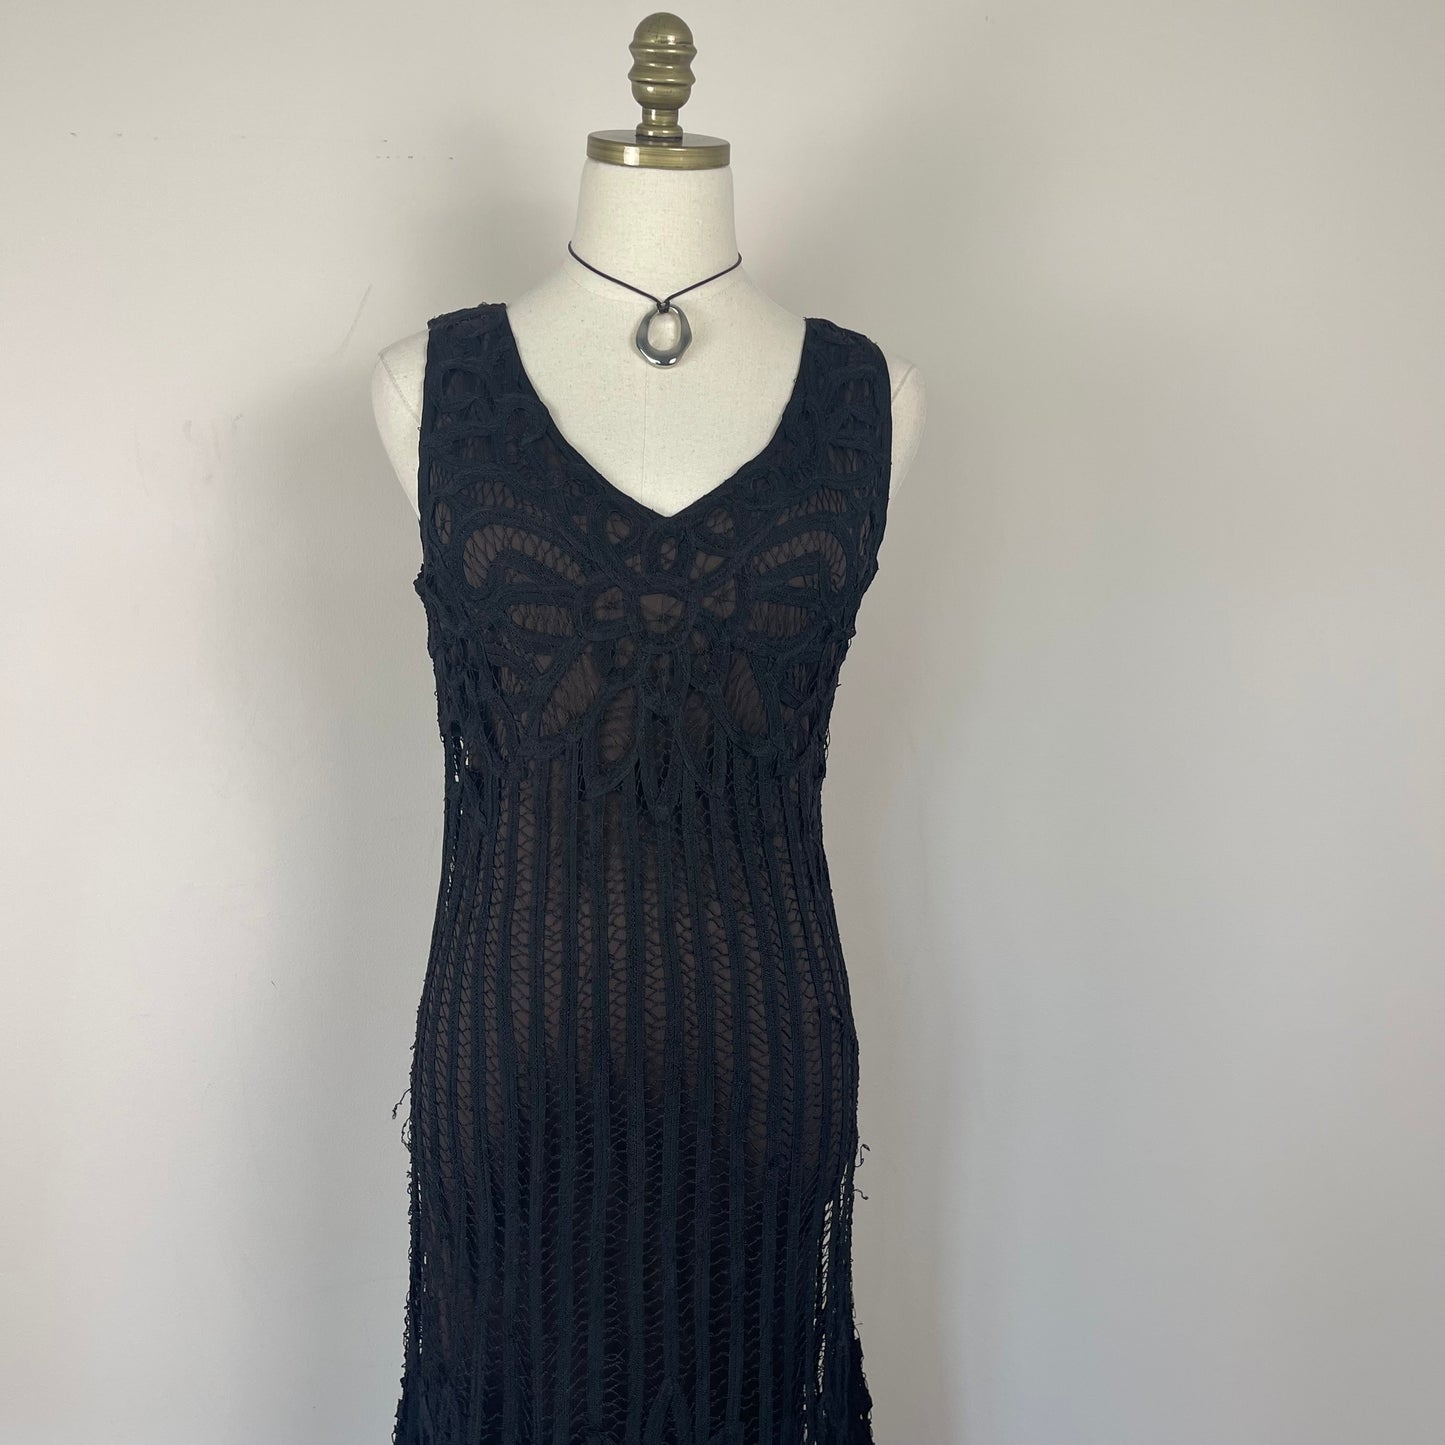 Vintage Open Knit Black and Brown Maxi Dress